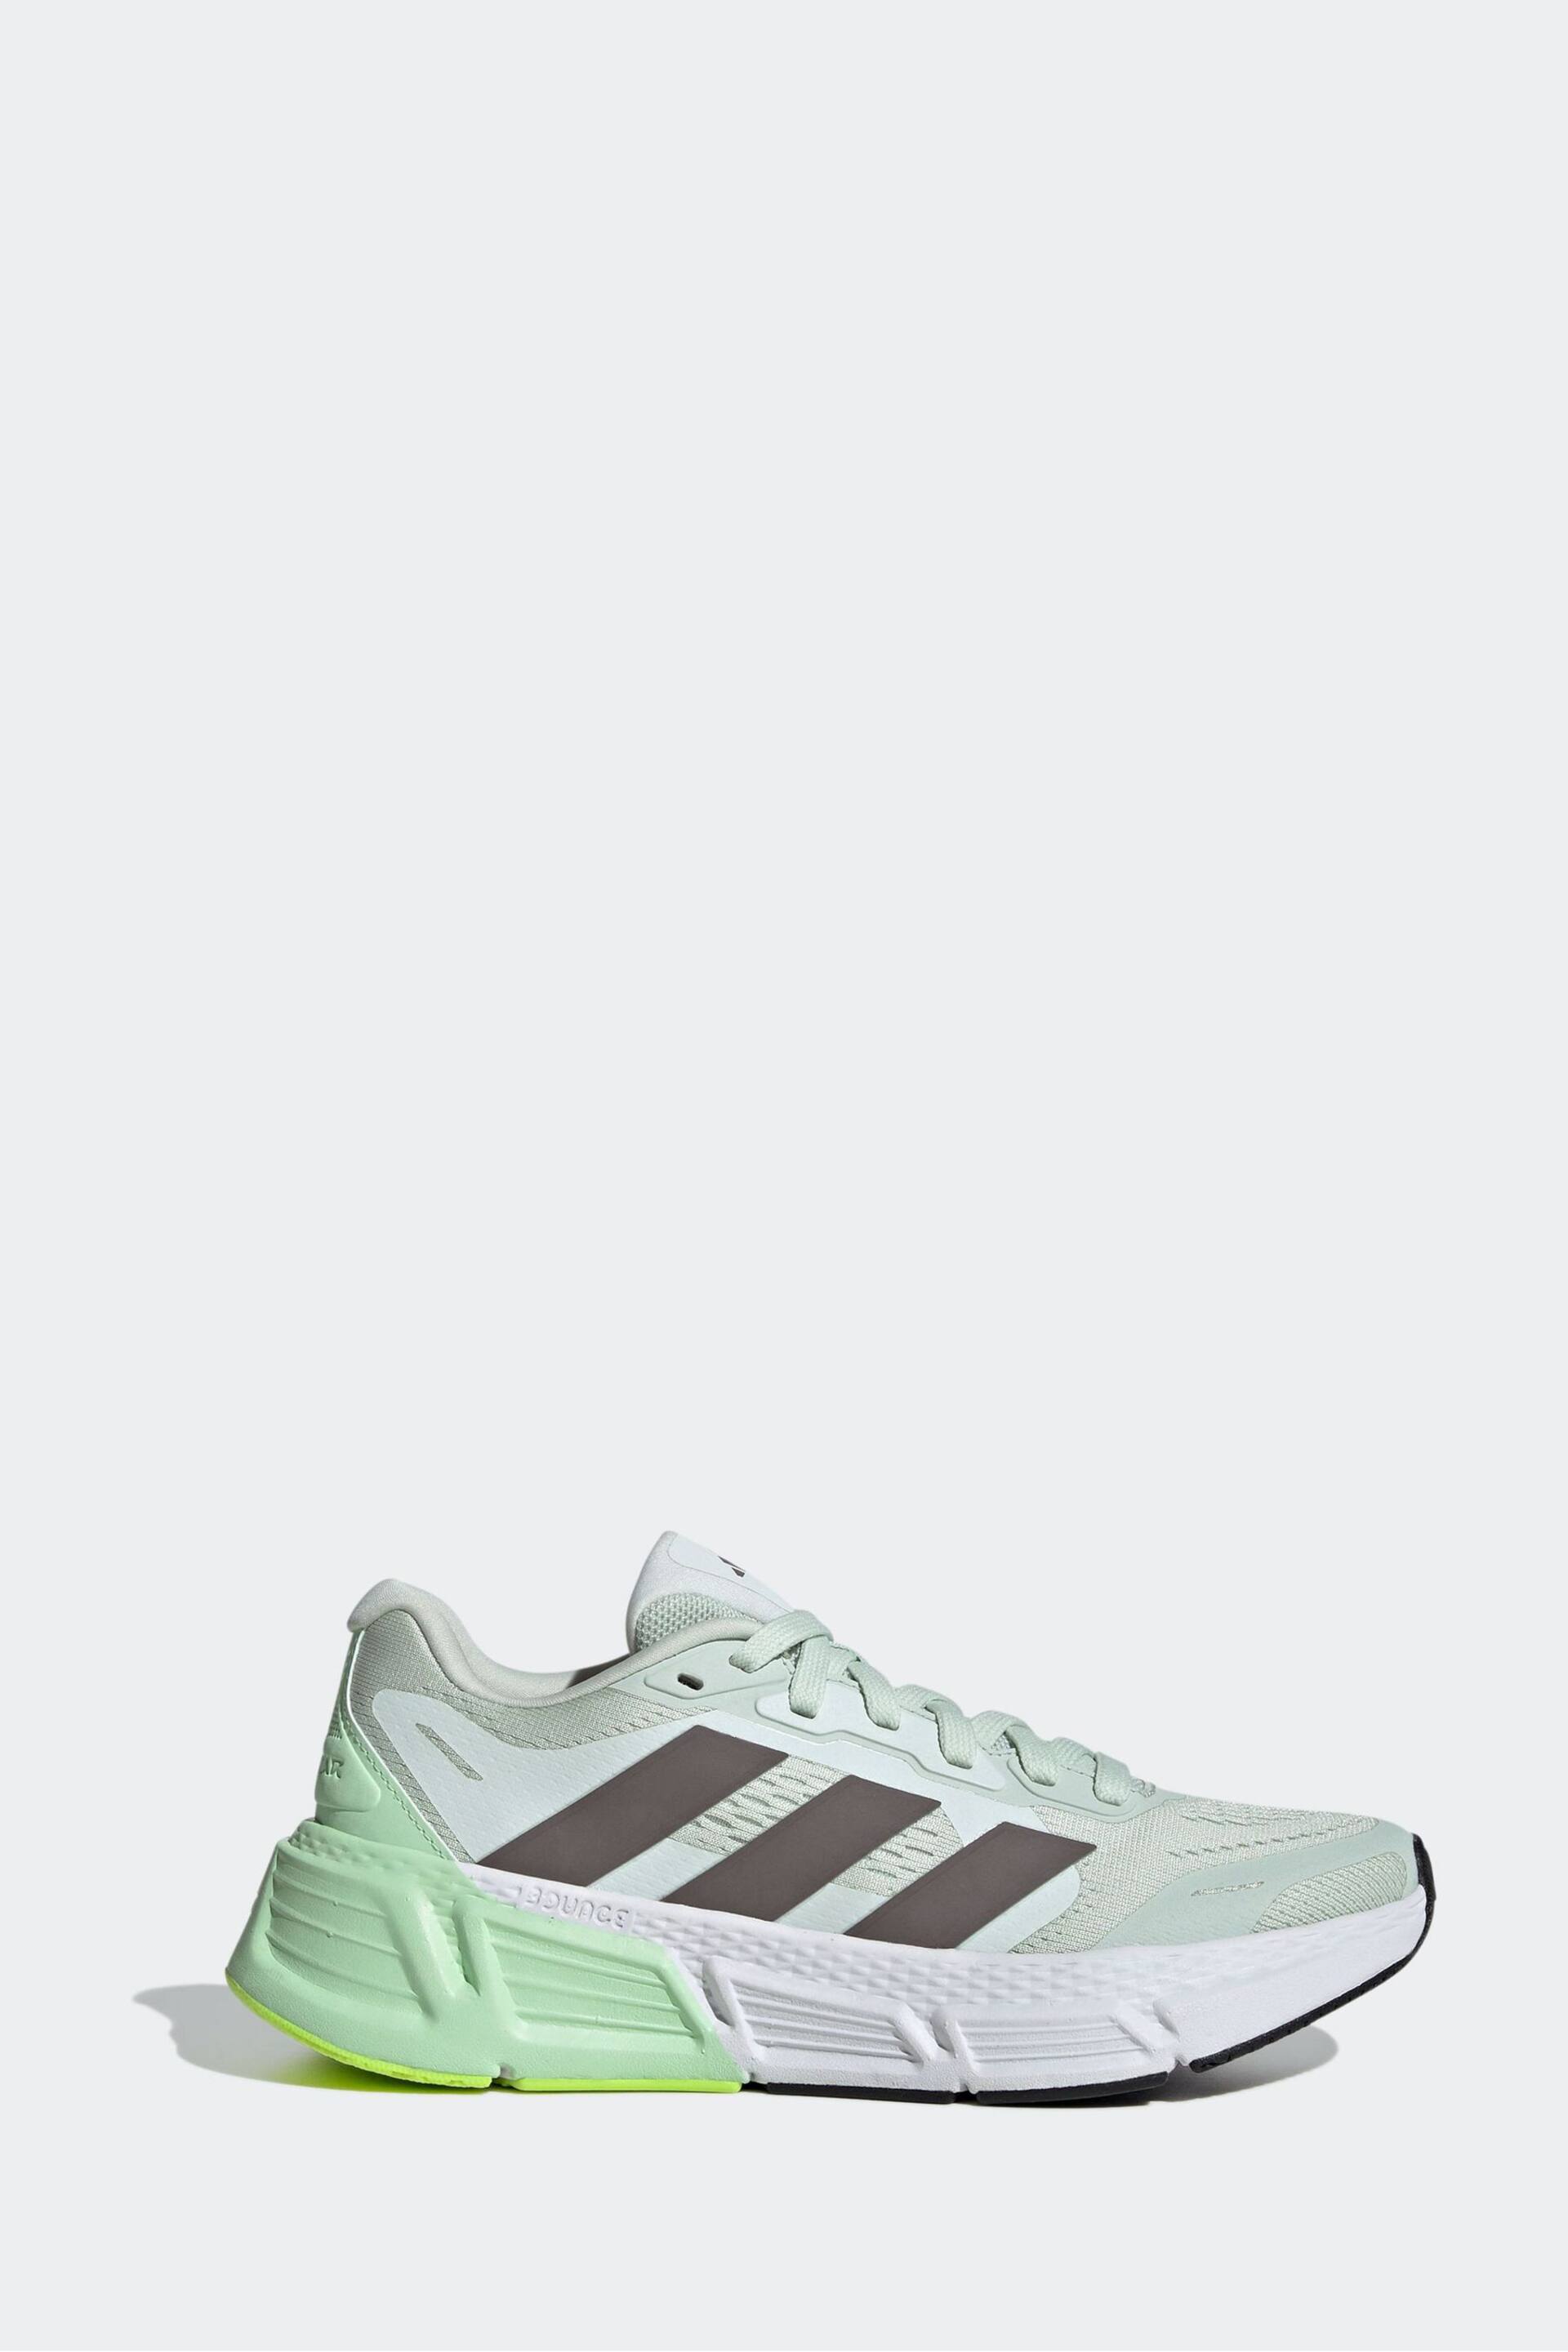 adidas Green Questar Trainers - Image 1 of 9